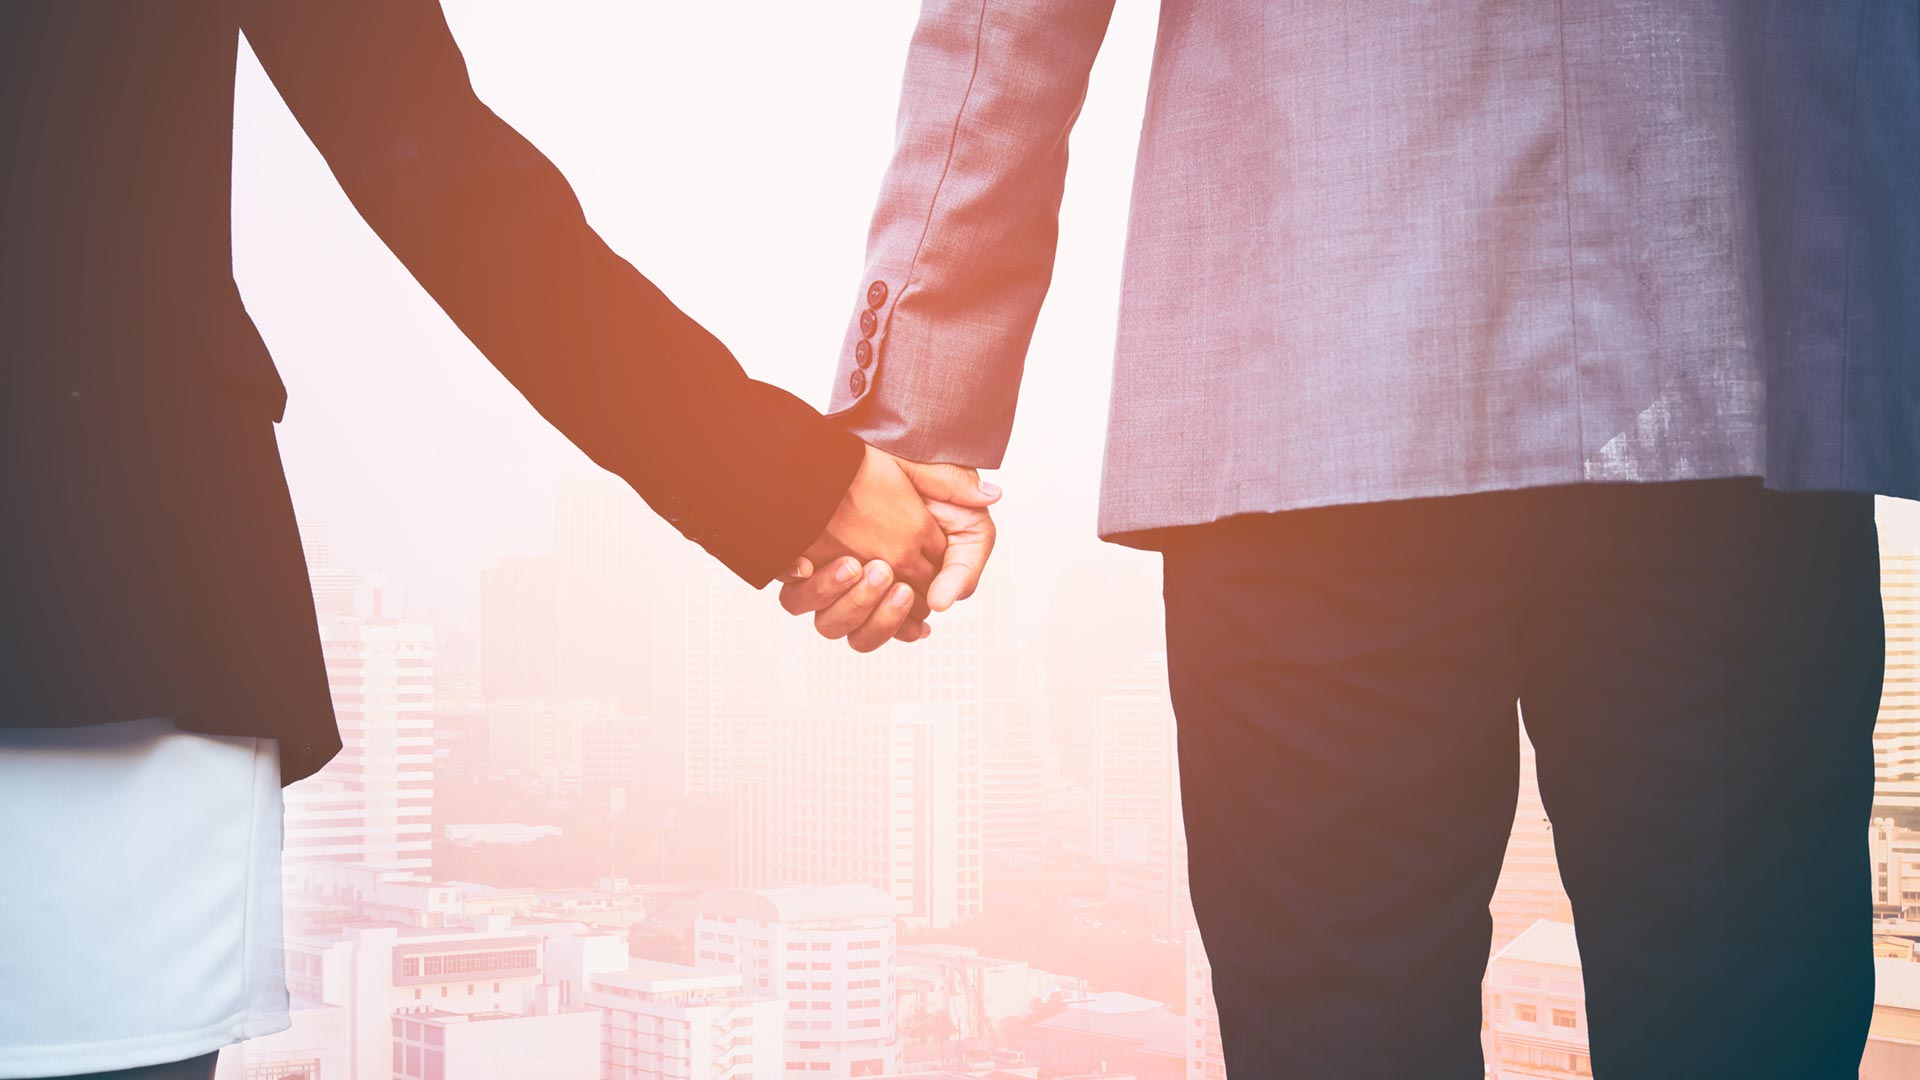 Two business people holding hands in front of the city